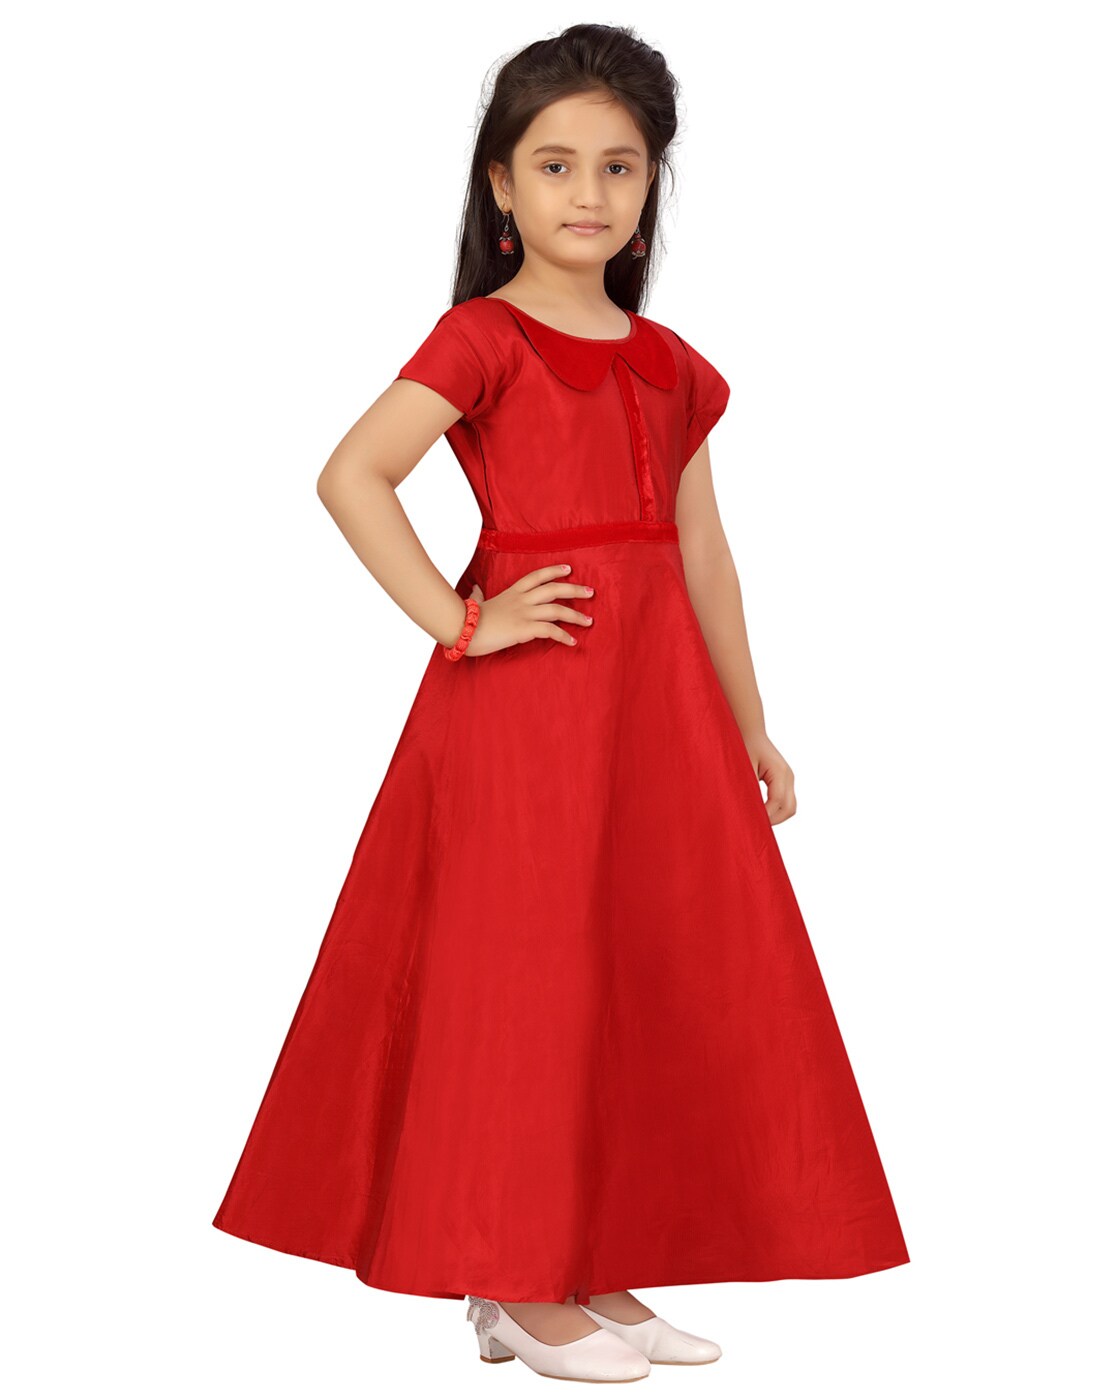 Buy Aarika Girls Navy Blue Color Embellished Work Gown  (G-21308-NAVY-BLUE-24) at Amazon.in